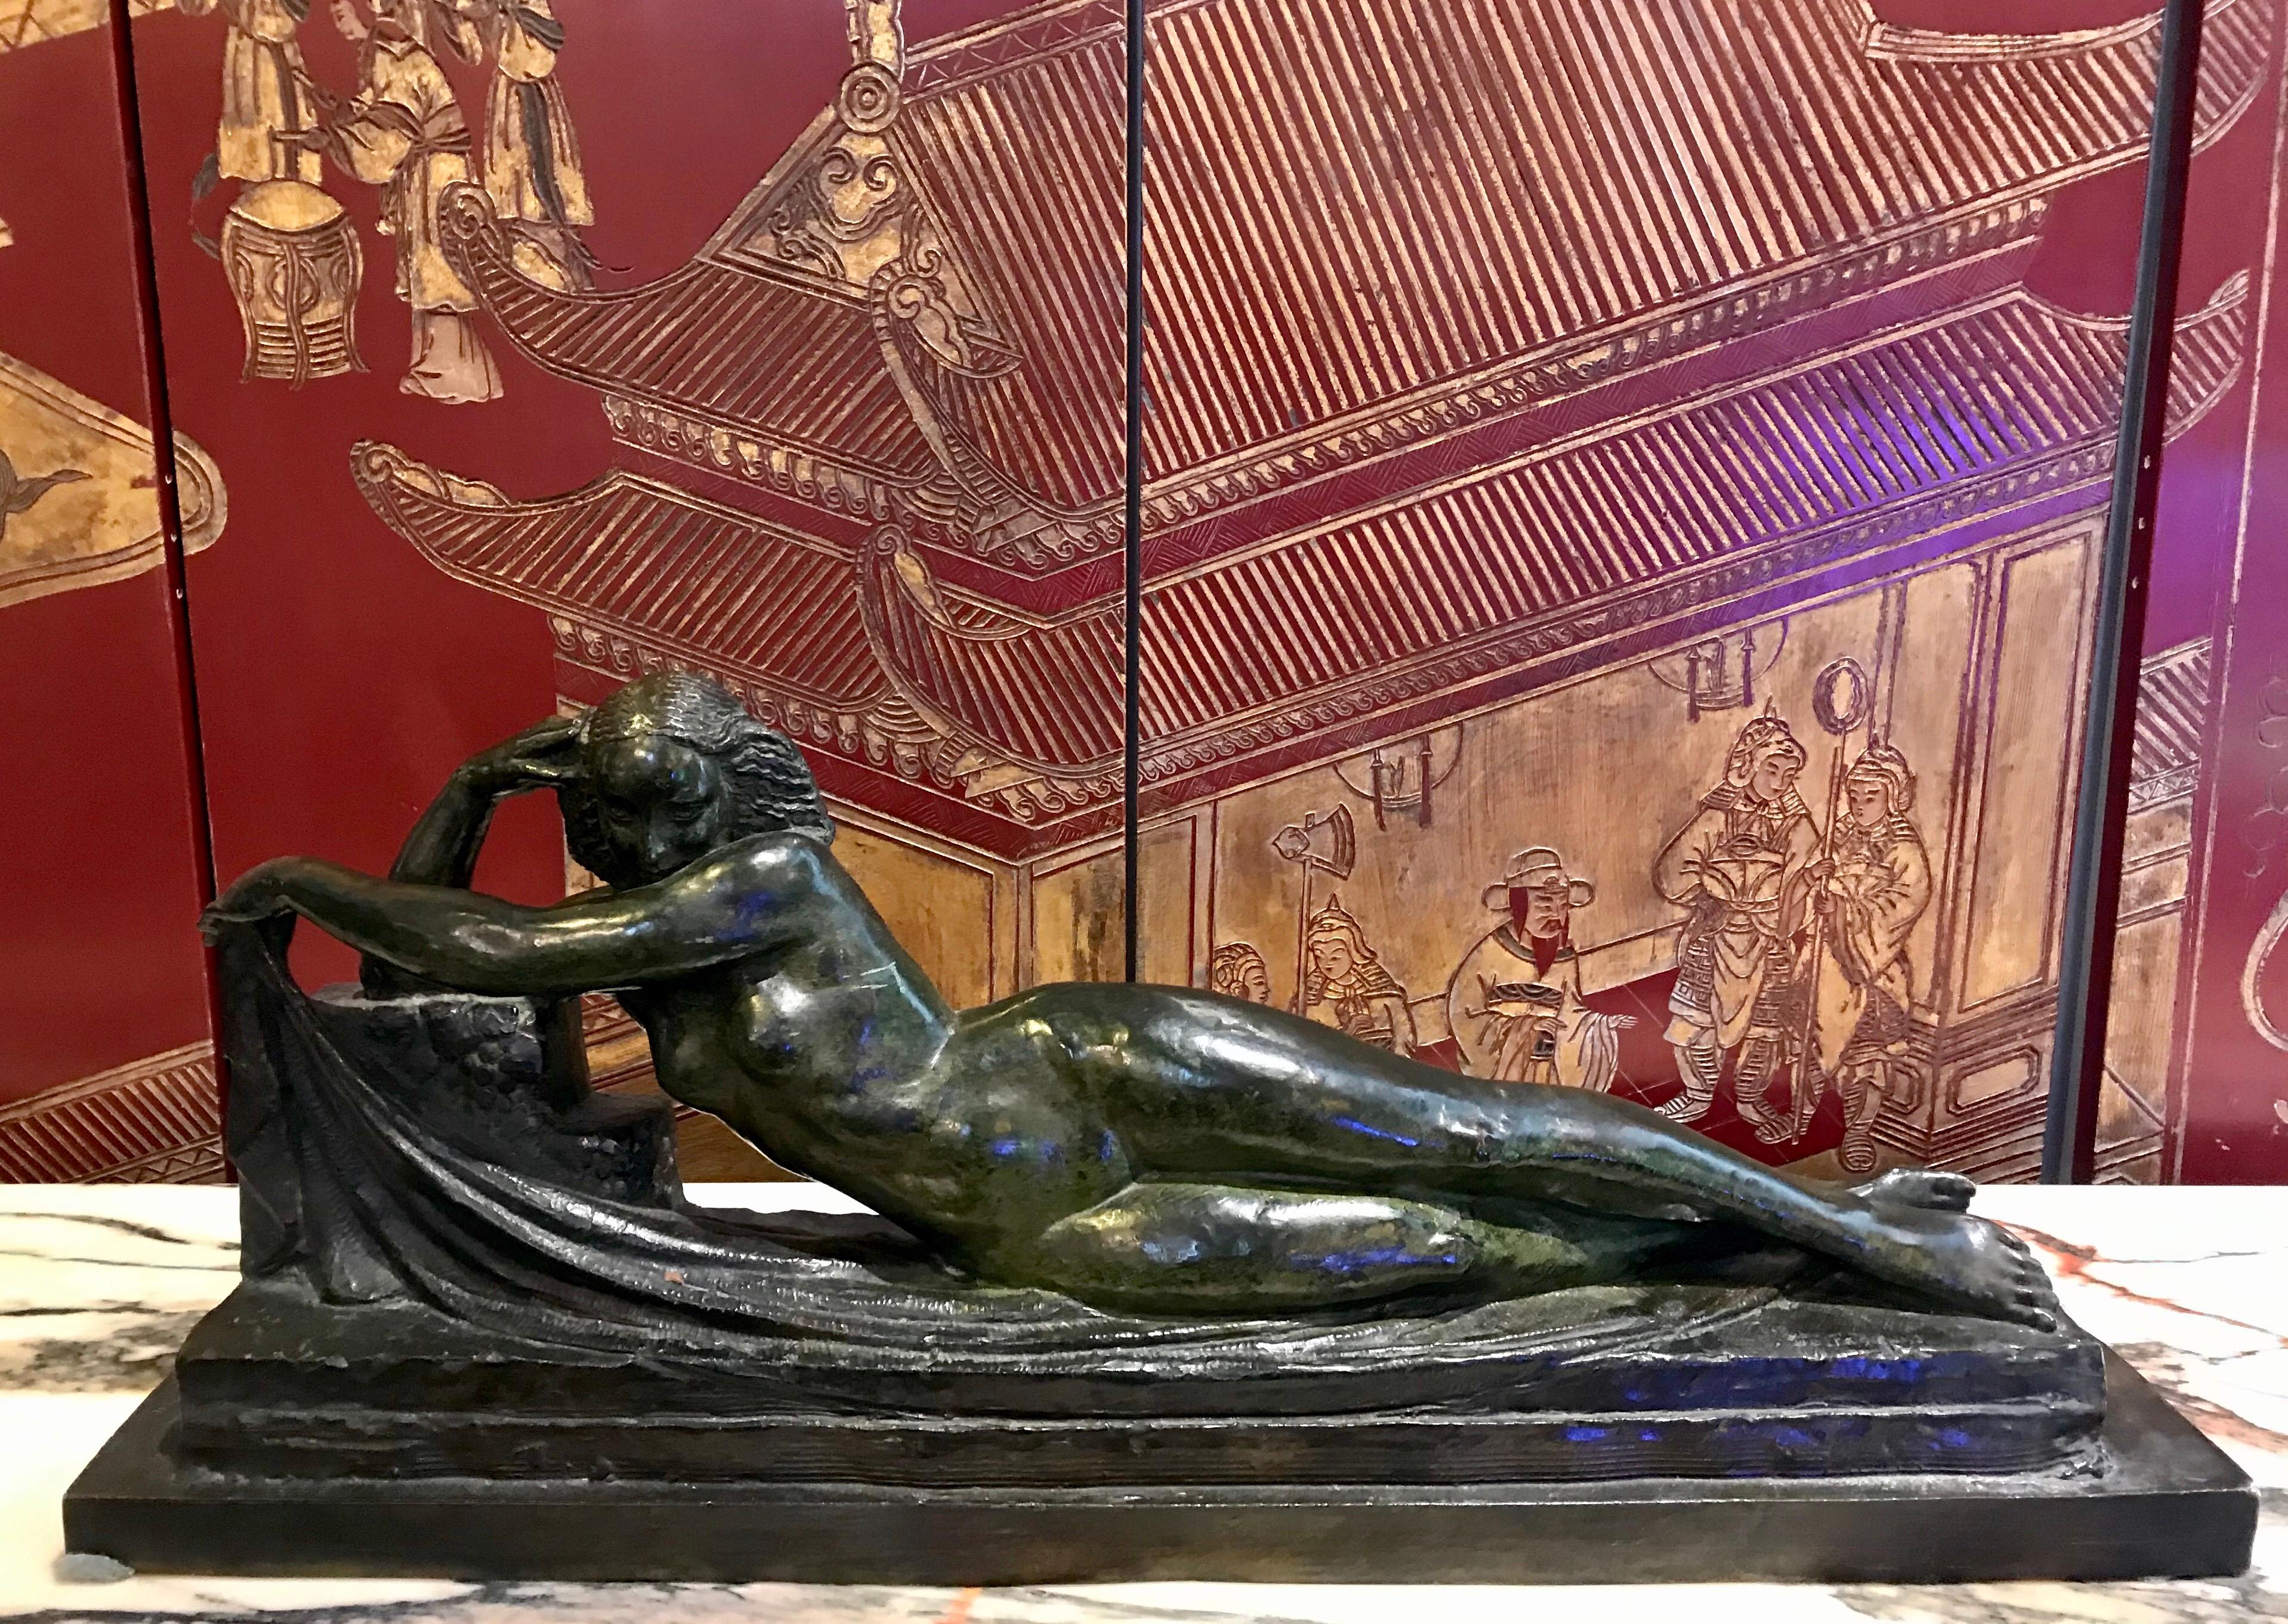 Pierre Le Faguays, French sculptor female figure in green patinated bronze. Modeled as a female nude with draped cloth. Tremendous details, unusual texture portrayed in a form rarely seen in his Art Deco sculptures. Signed Le Faguays on the base